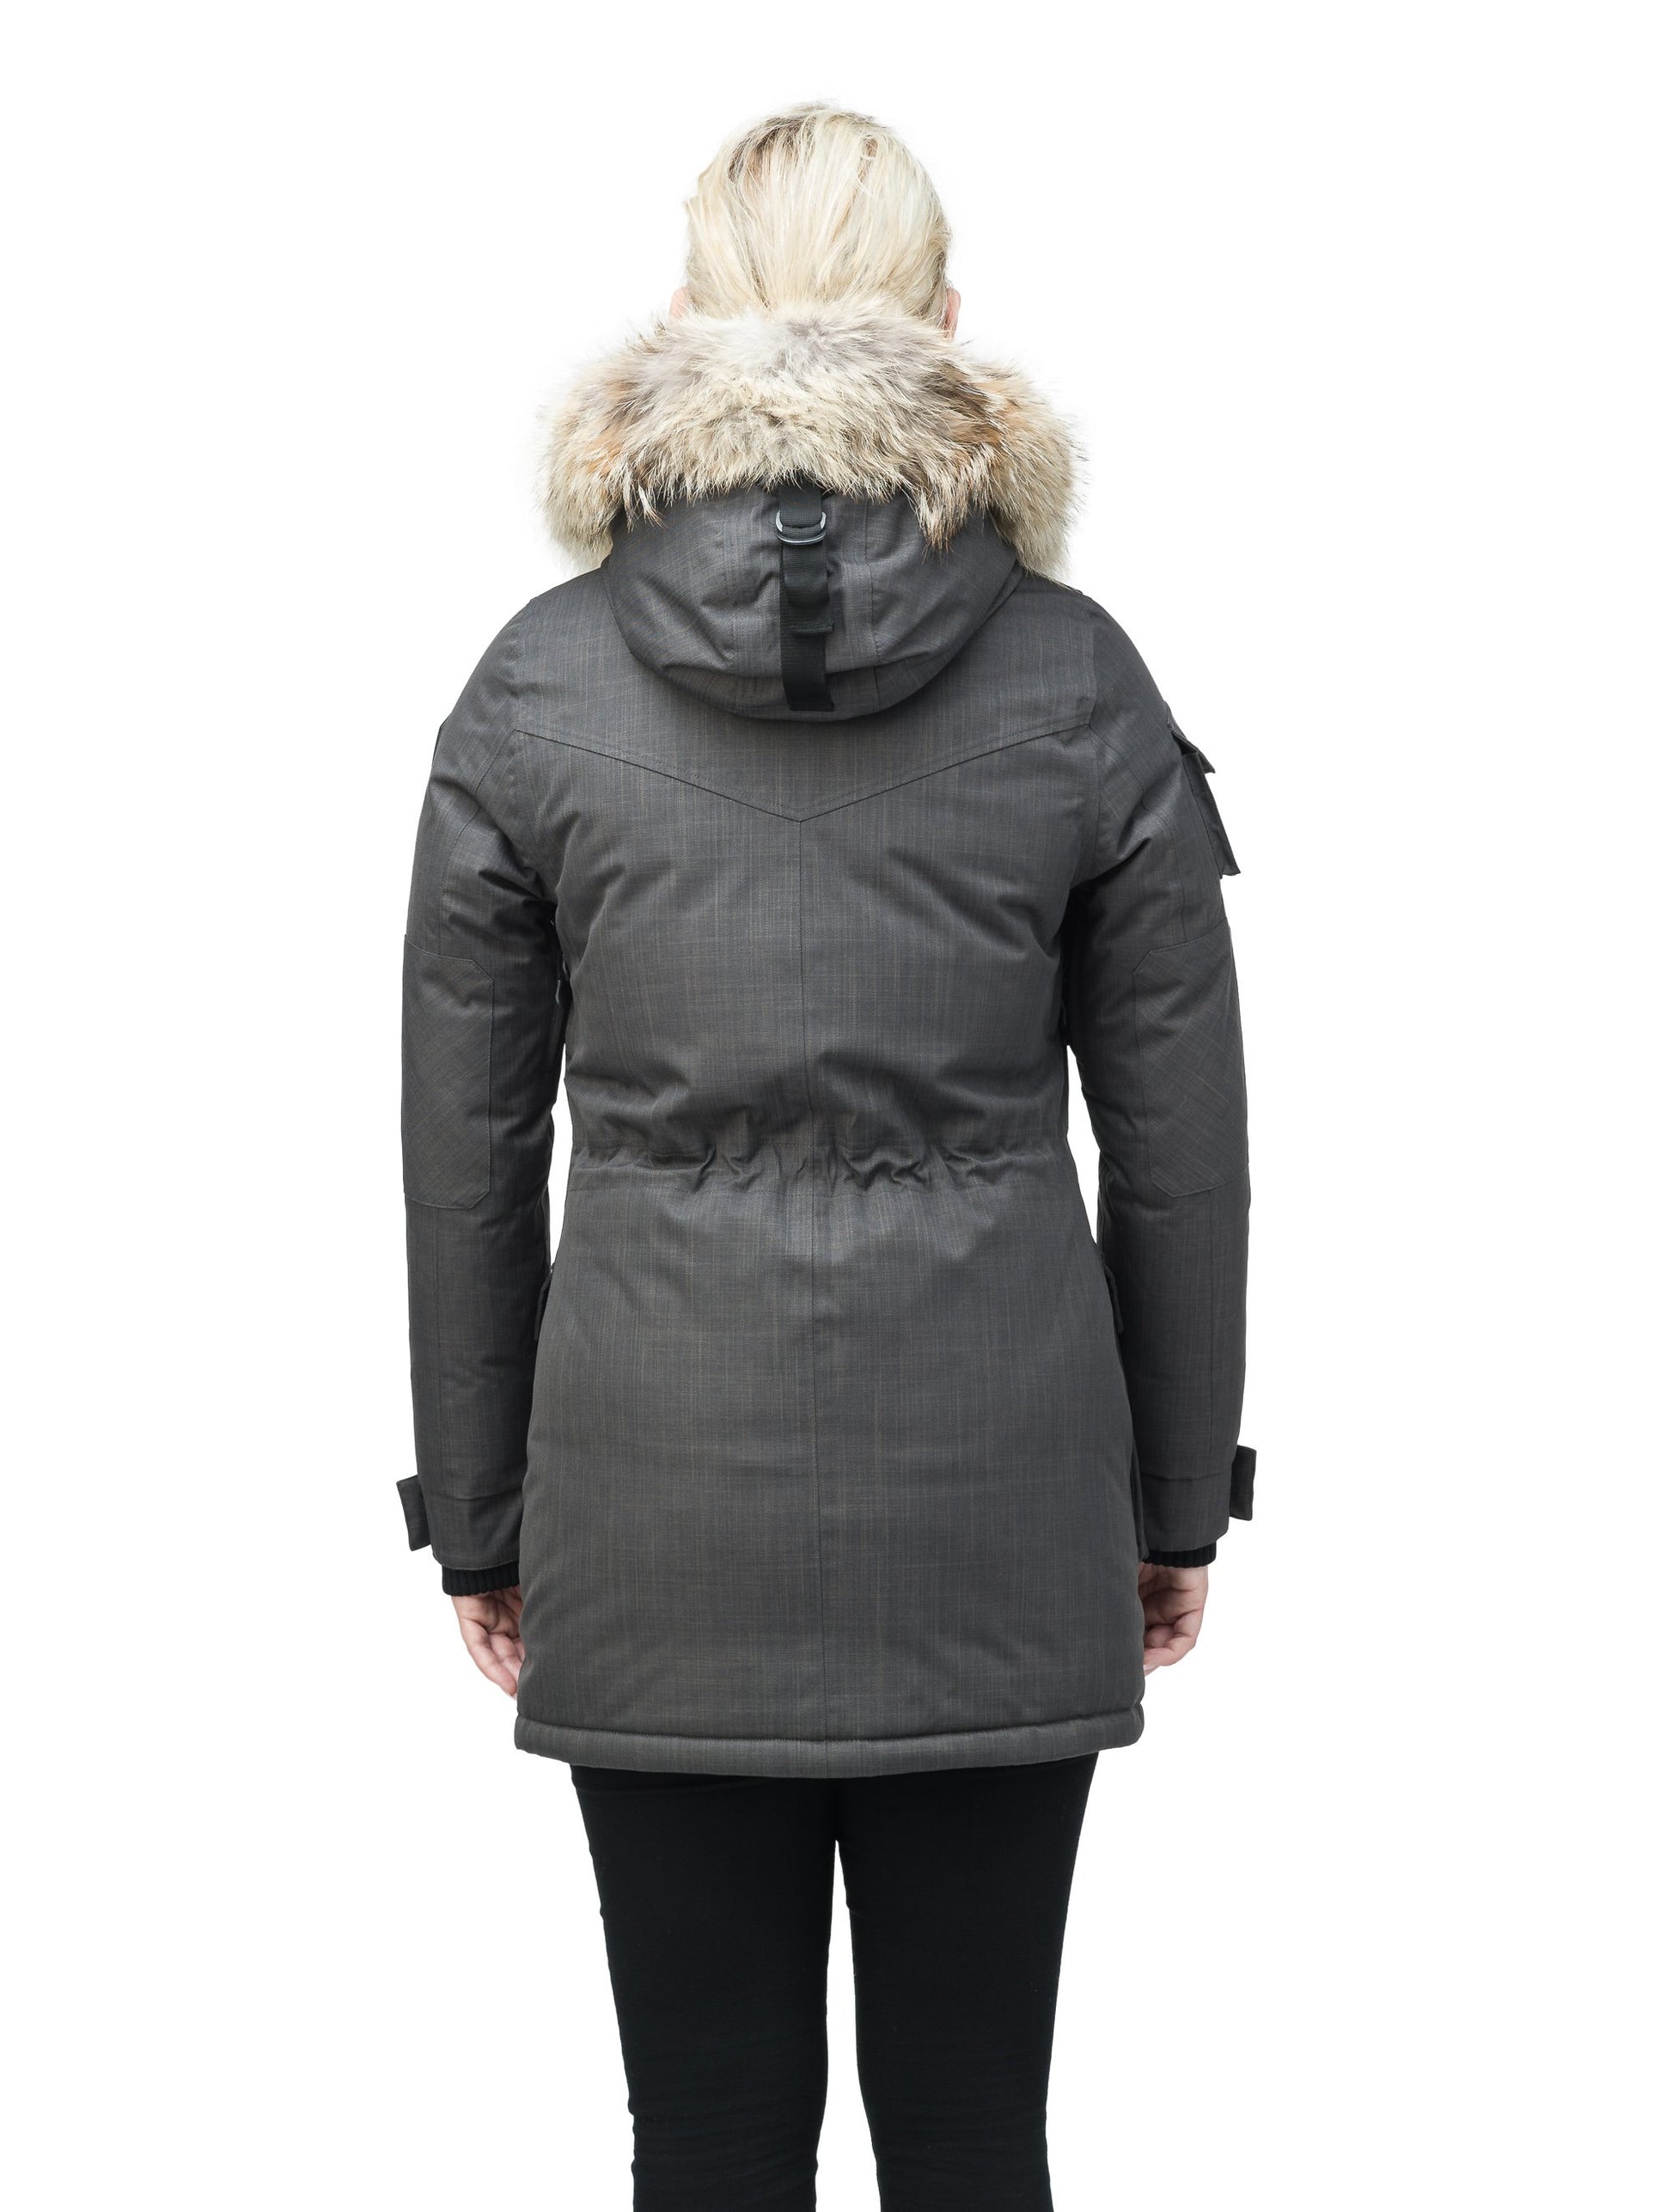 Women's down filled thigh length parka with four pleated patch pockets and an adjustable waist in CH Steel Grey